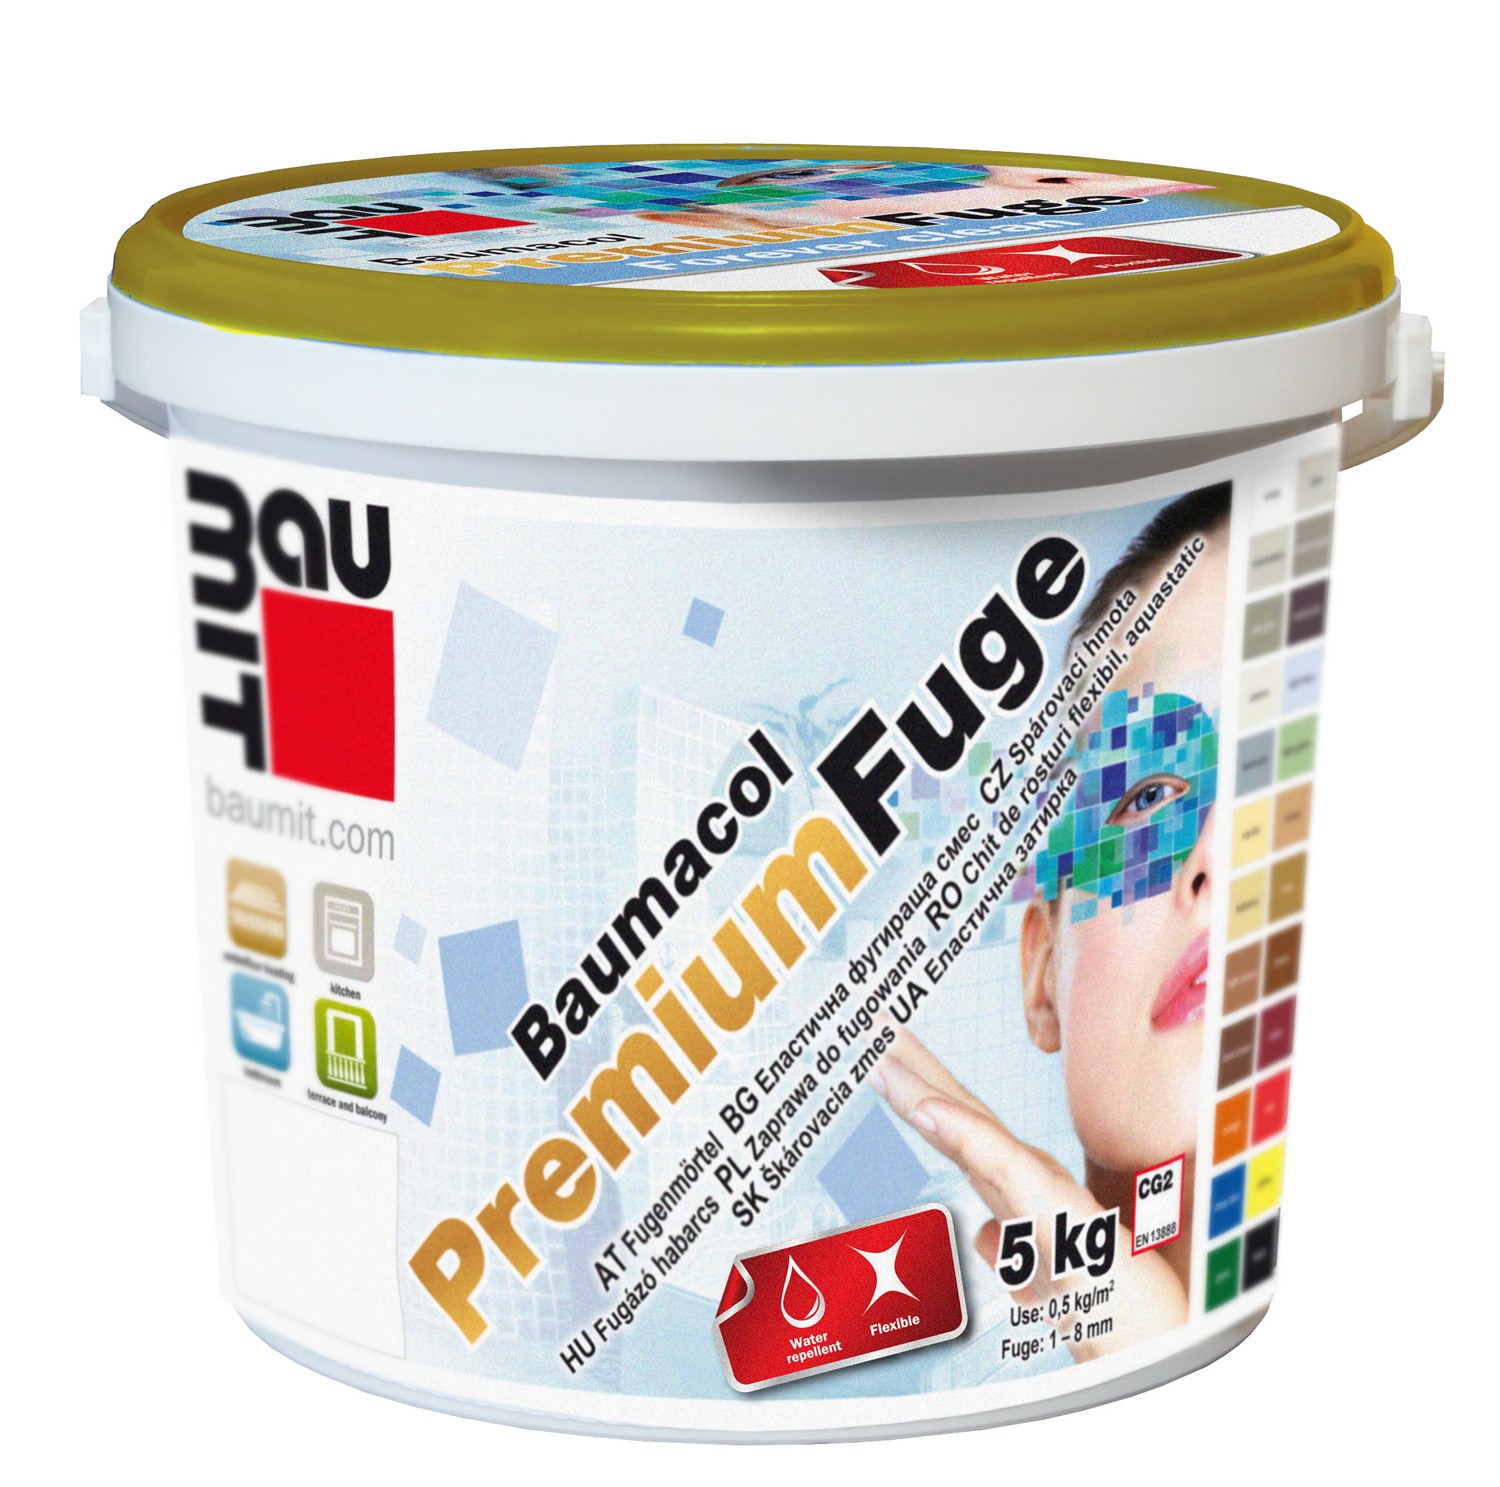 Joints - Baumit PremiumFuge Gray 5kg joints putty, https:maxbau.ro